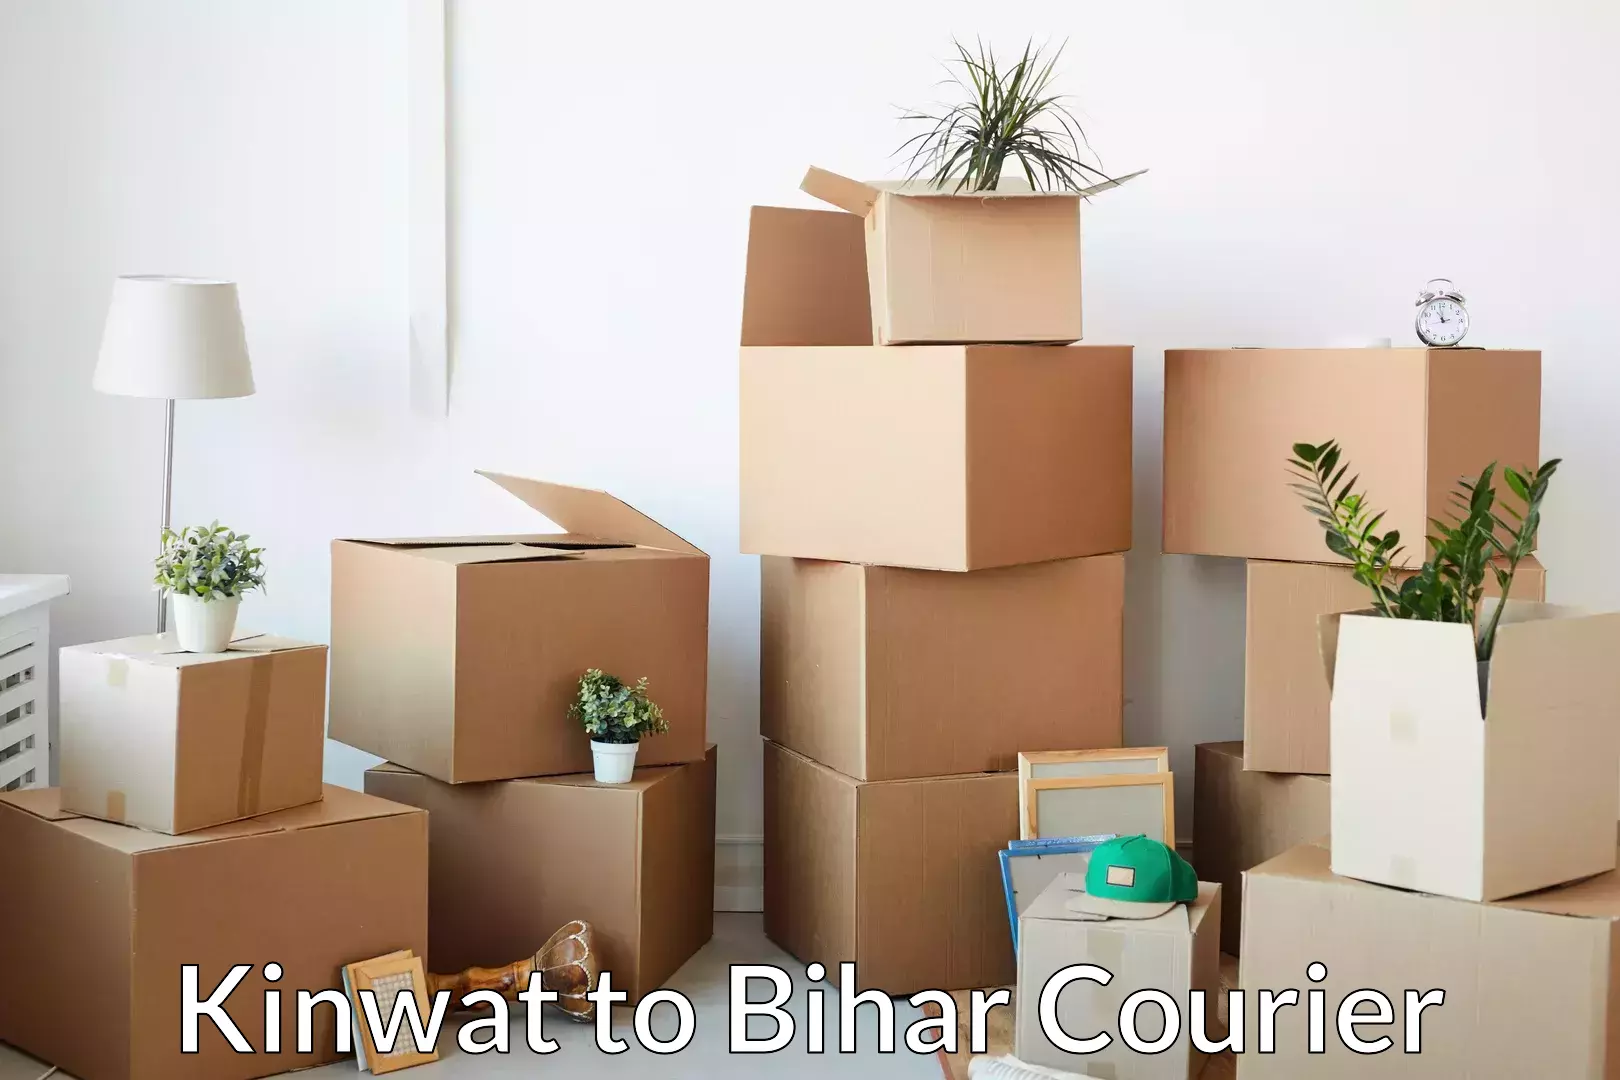 Trusted moving company Kinwat to Mairwa